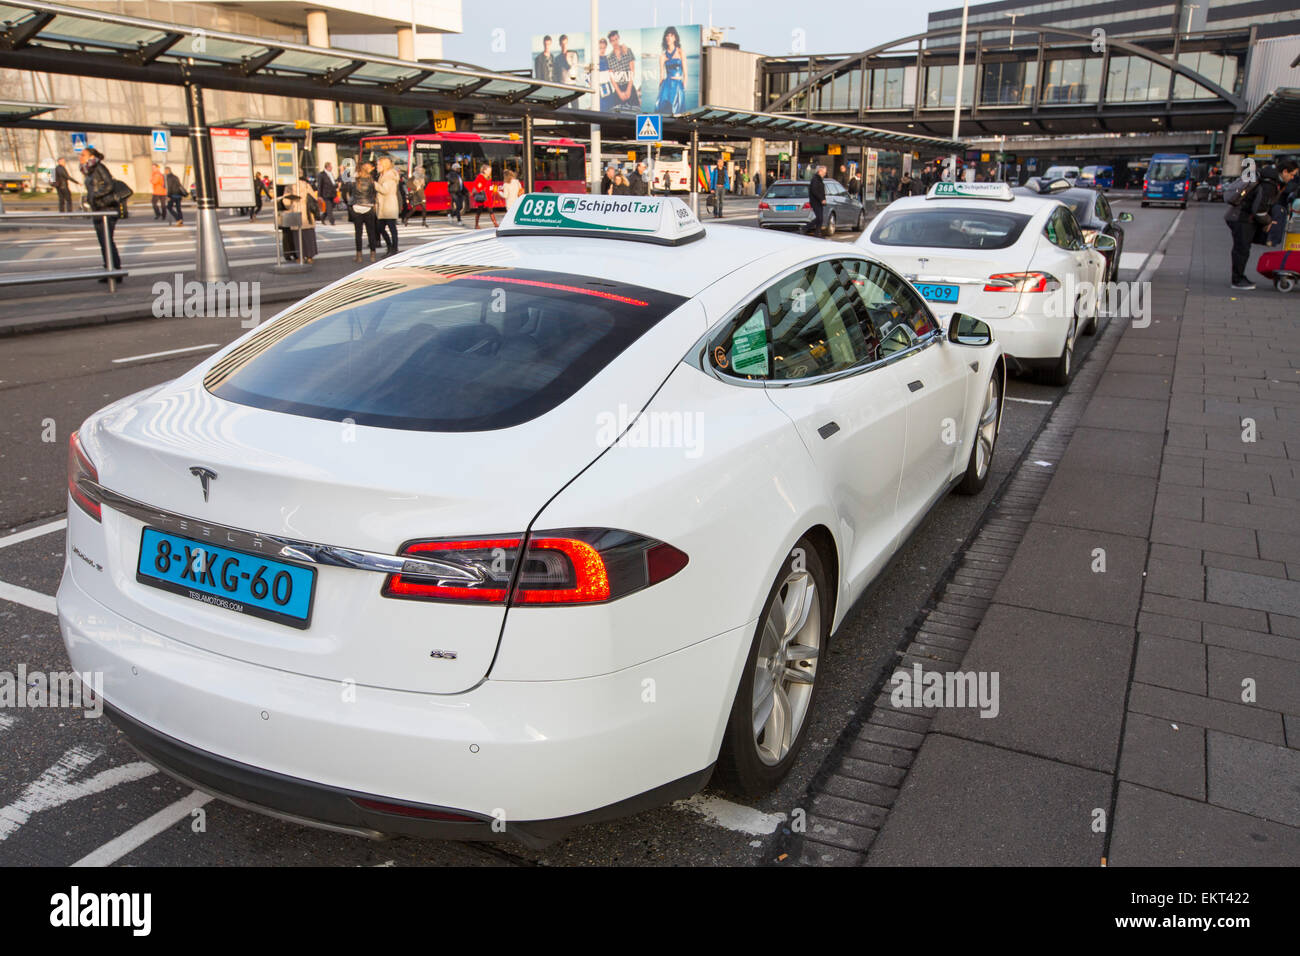 Tesla electric cars being used as taxi's at Schiphol airport in Amsterdam, Holland. Stock Photo